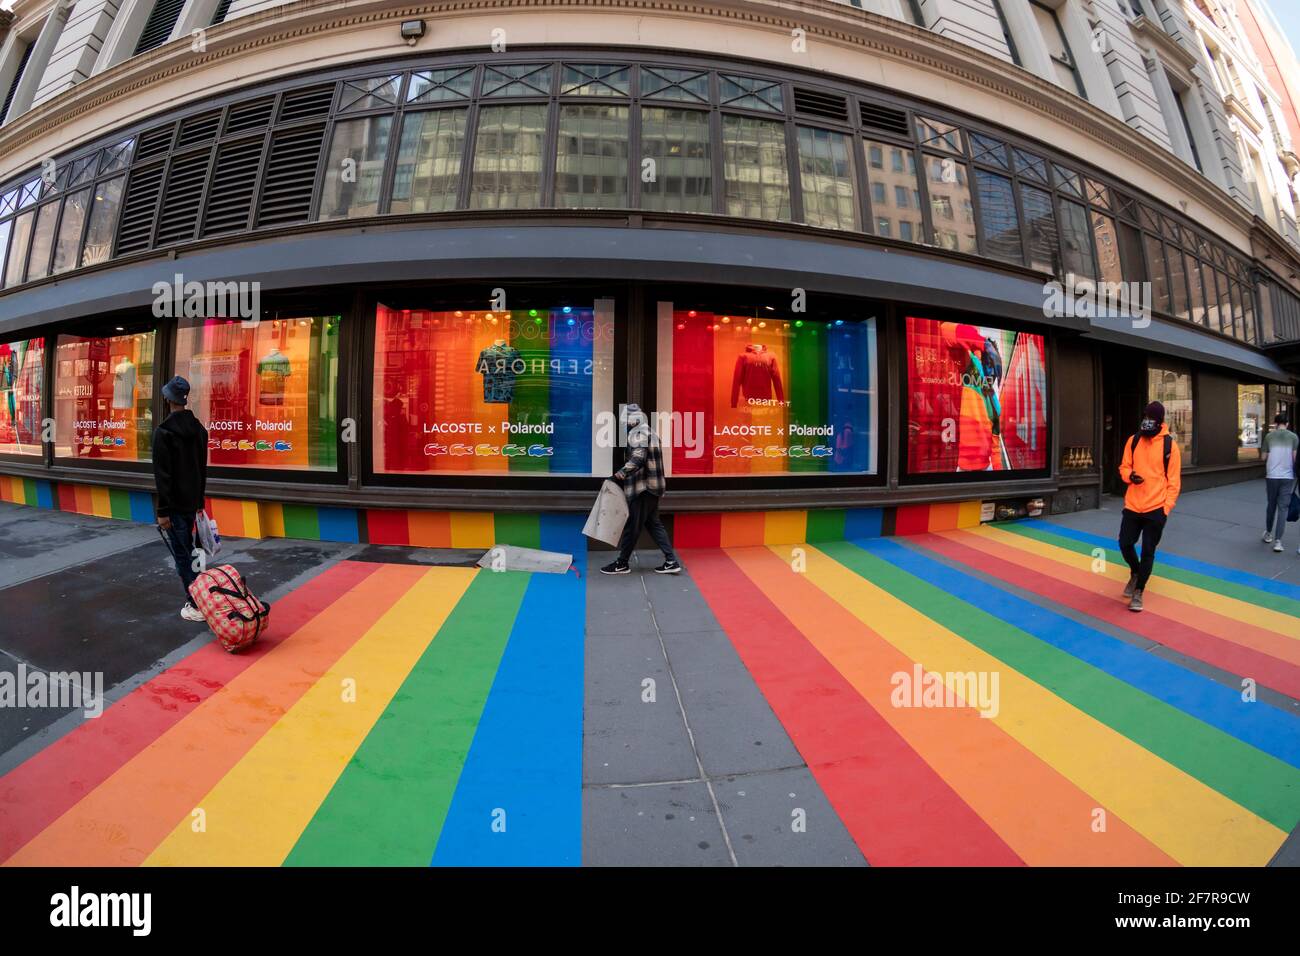 A worker removes a vinyl rainbow from in front of MacyÕs department store on Tuesday, March 30, 2021. The display was part of a promotion for the Lacoste X Polaroid collaboration that was sold at MacyÕs. The rainbow has been part of the Polaroid logo since PolaroidÕs first color instant film was introduces in 1963. (© Richard B. Levine) Stock Photo